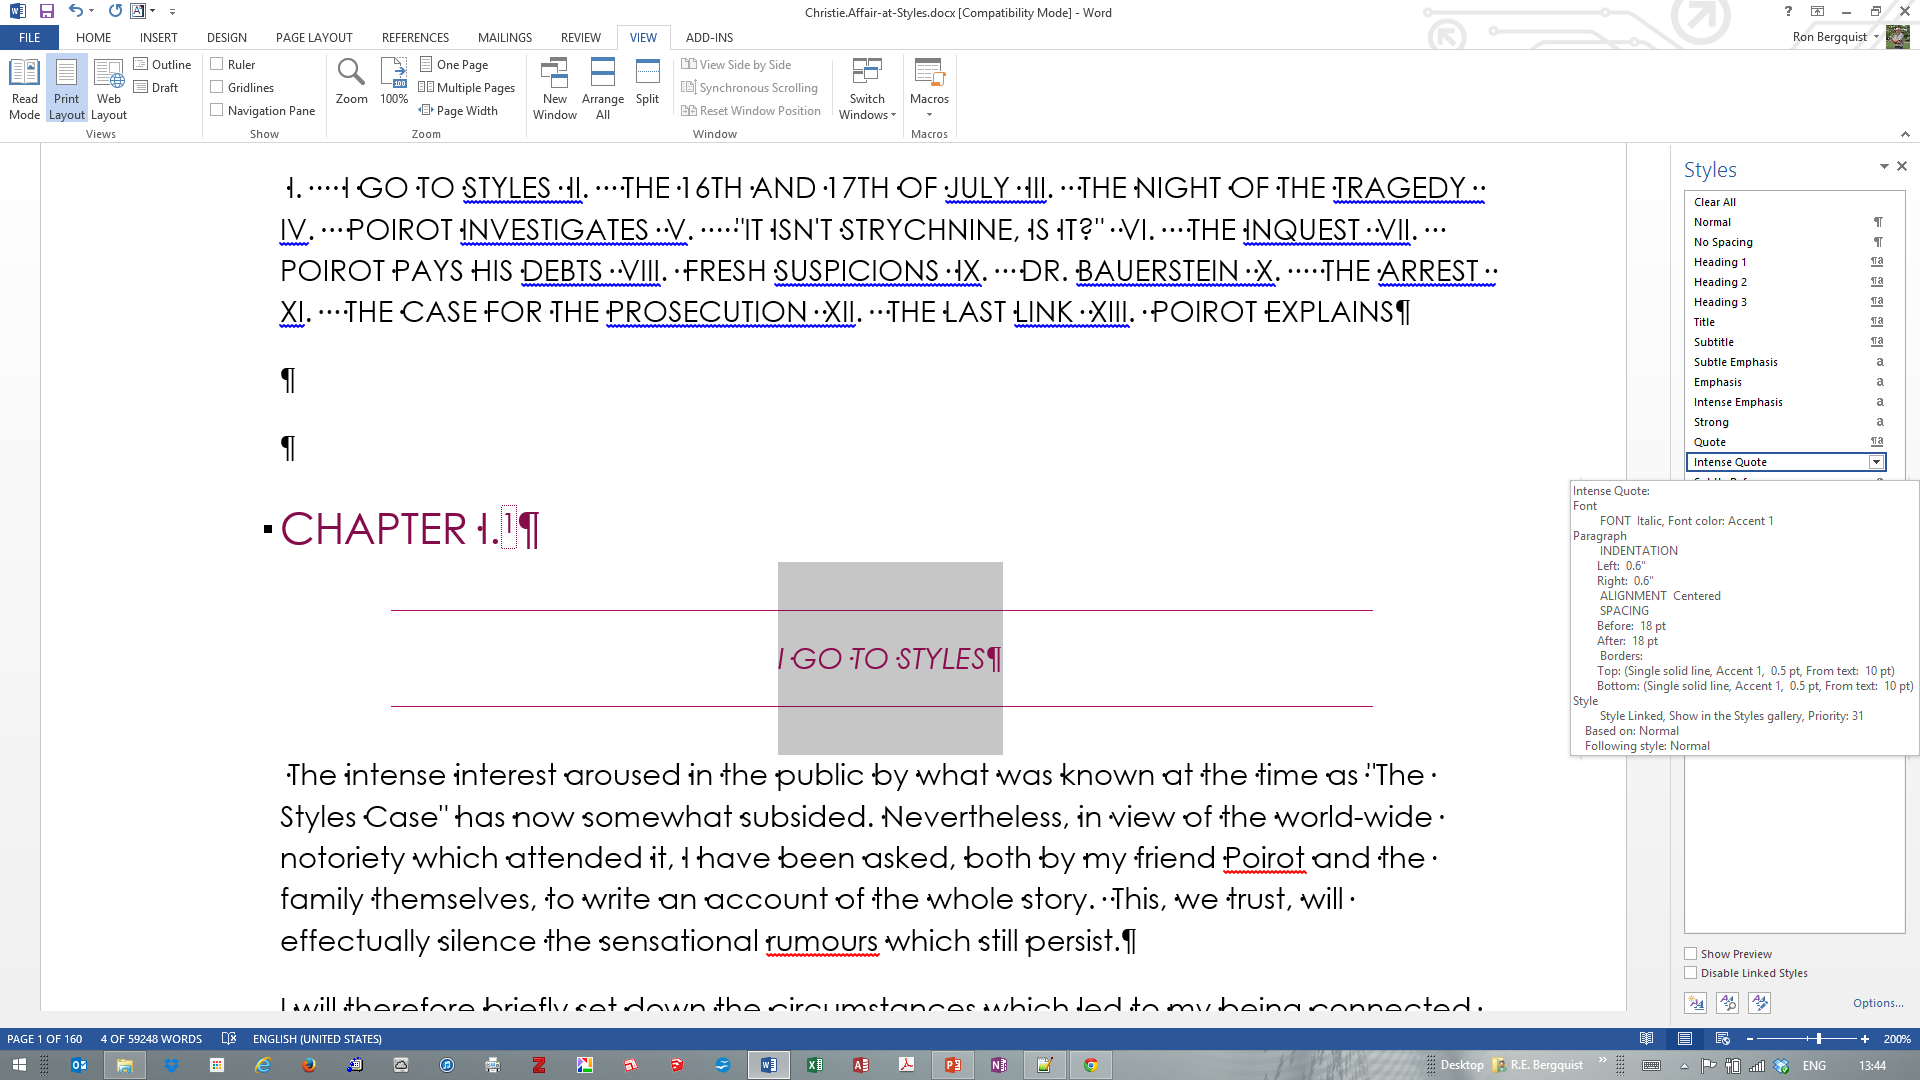 [MSWord 2013 applying a new style sidebar]